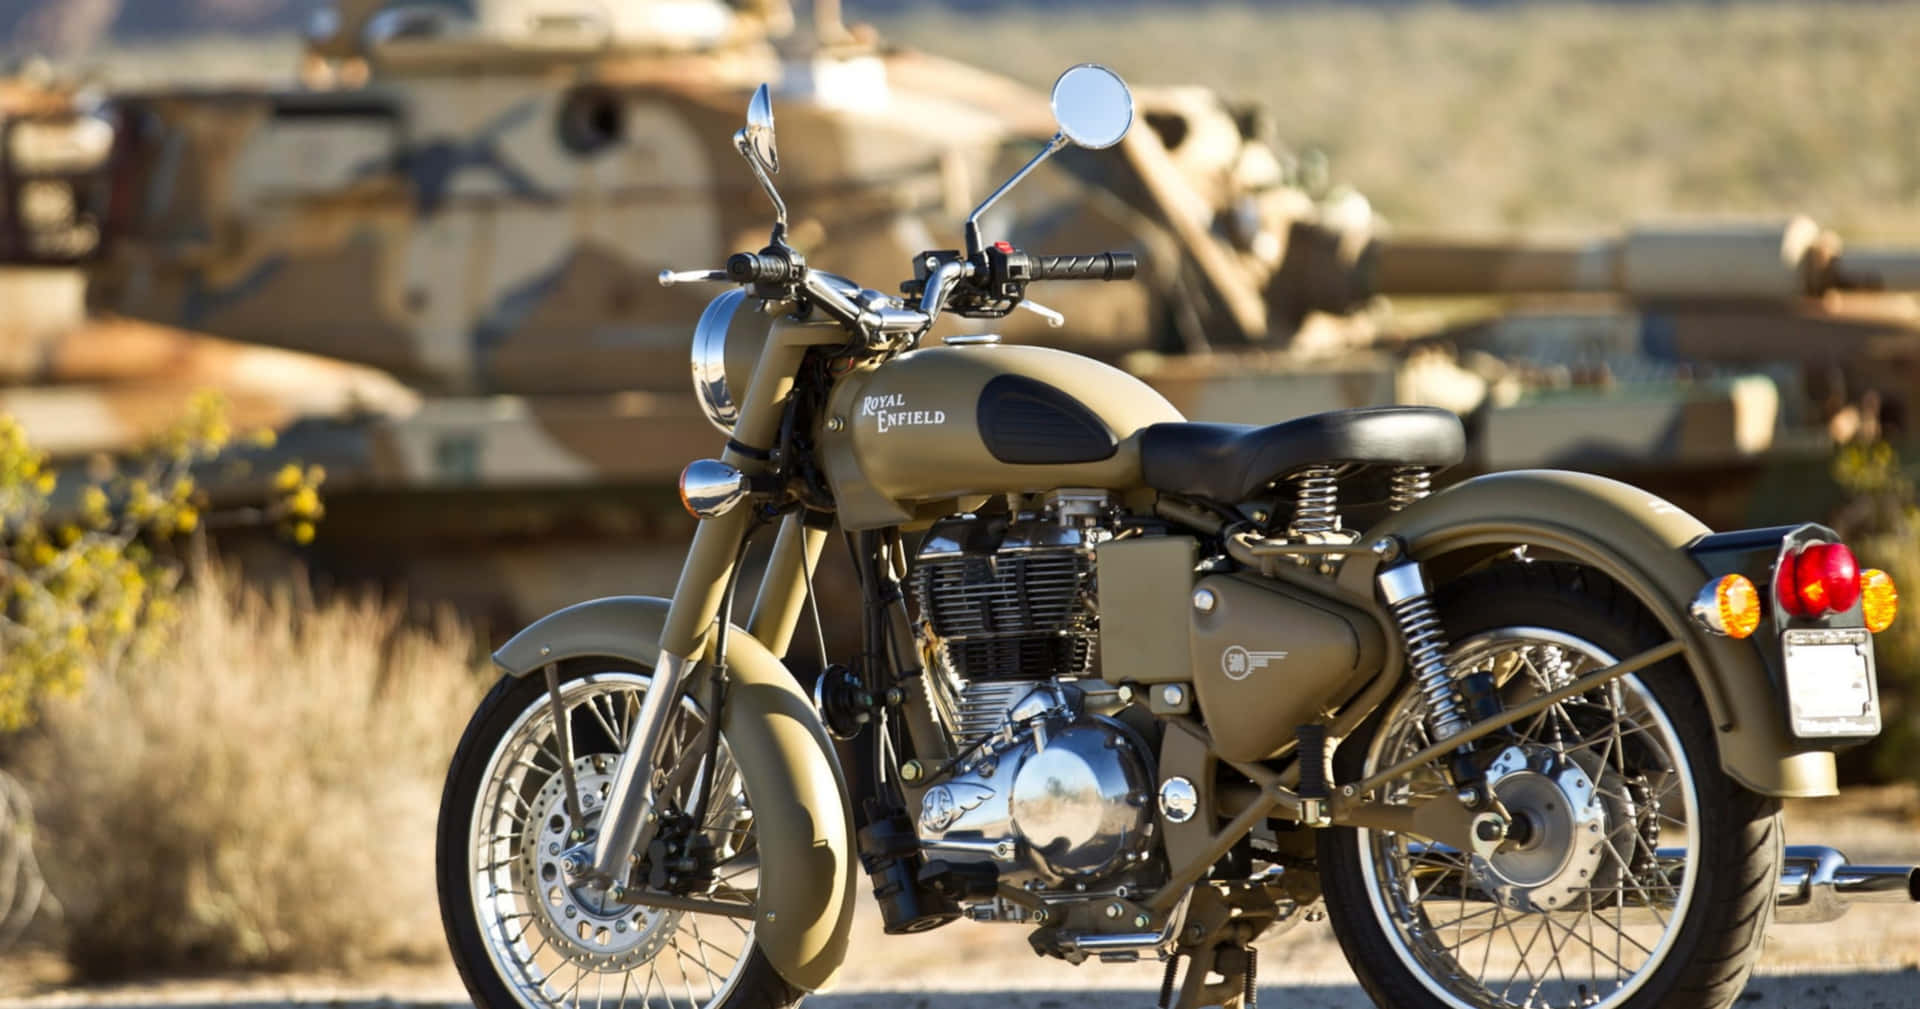 Immaginiroyal Enfield Classic Brown 500.